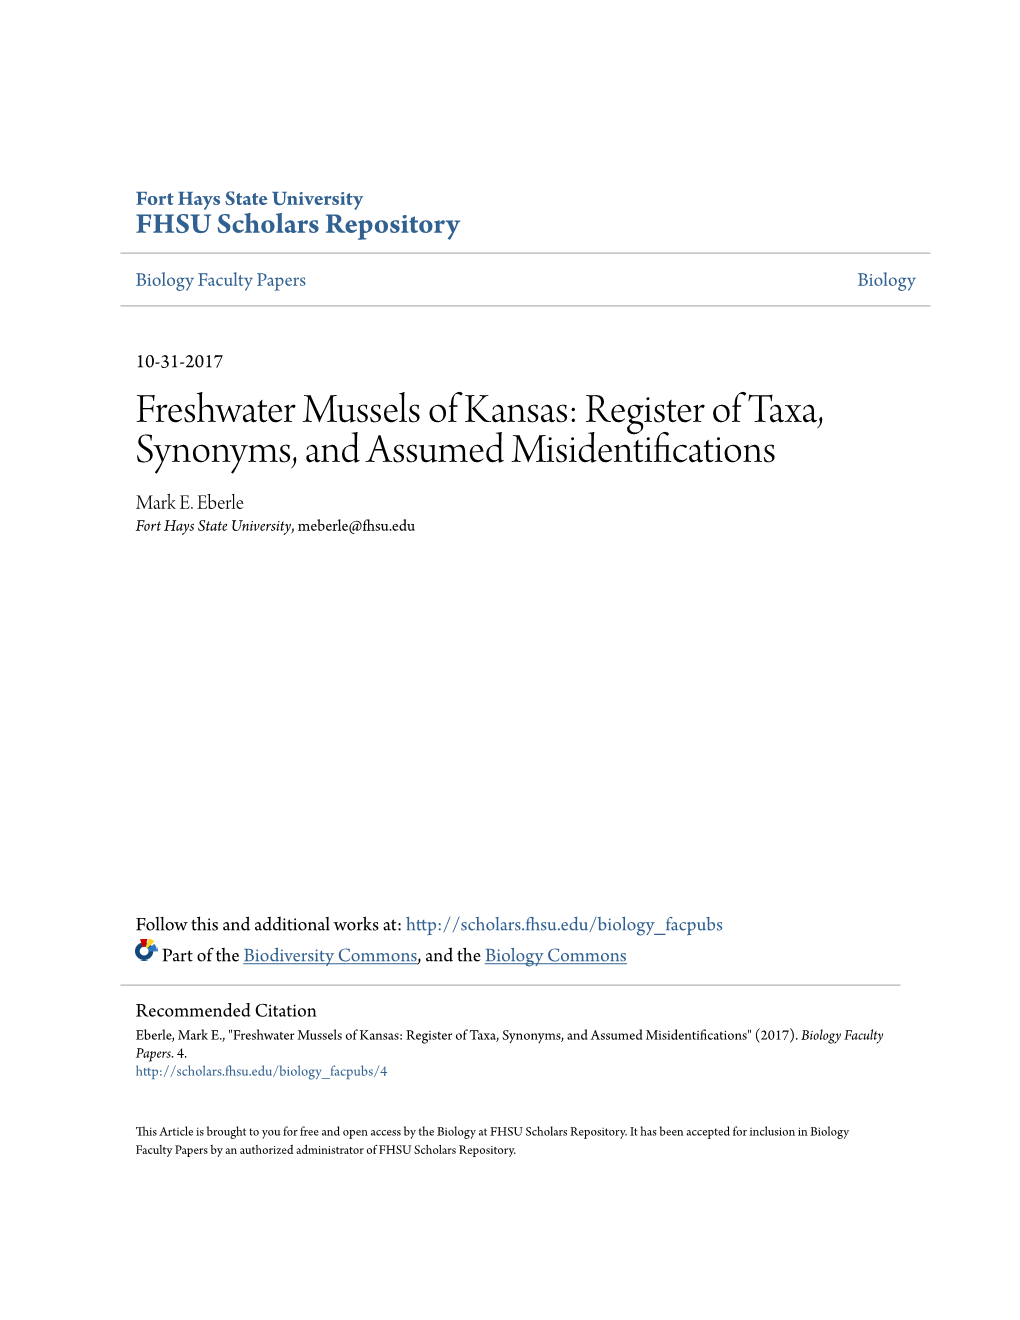 Freshwater Mussels of Kansas: Register of Taxa, Synonyms, and Assumed Misidentifications Mark E